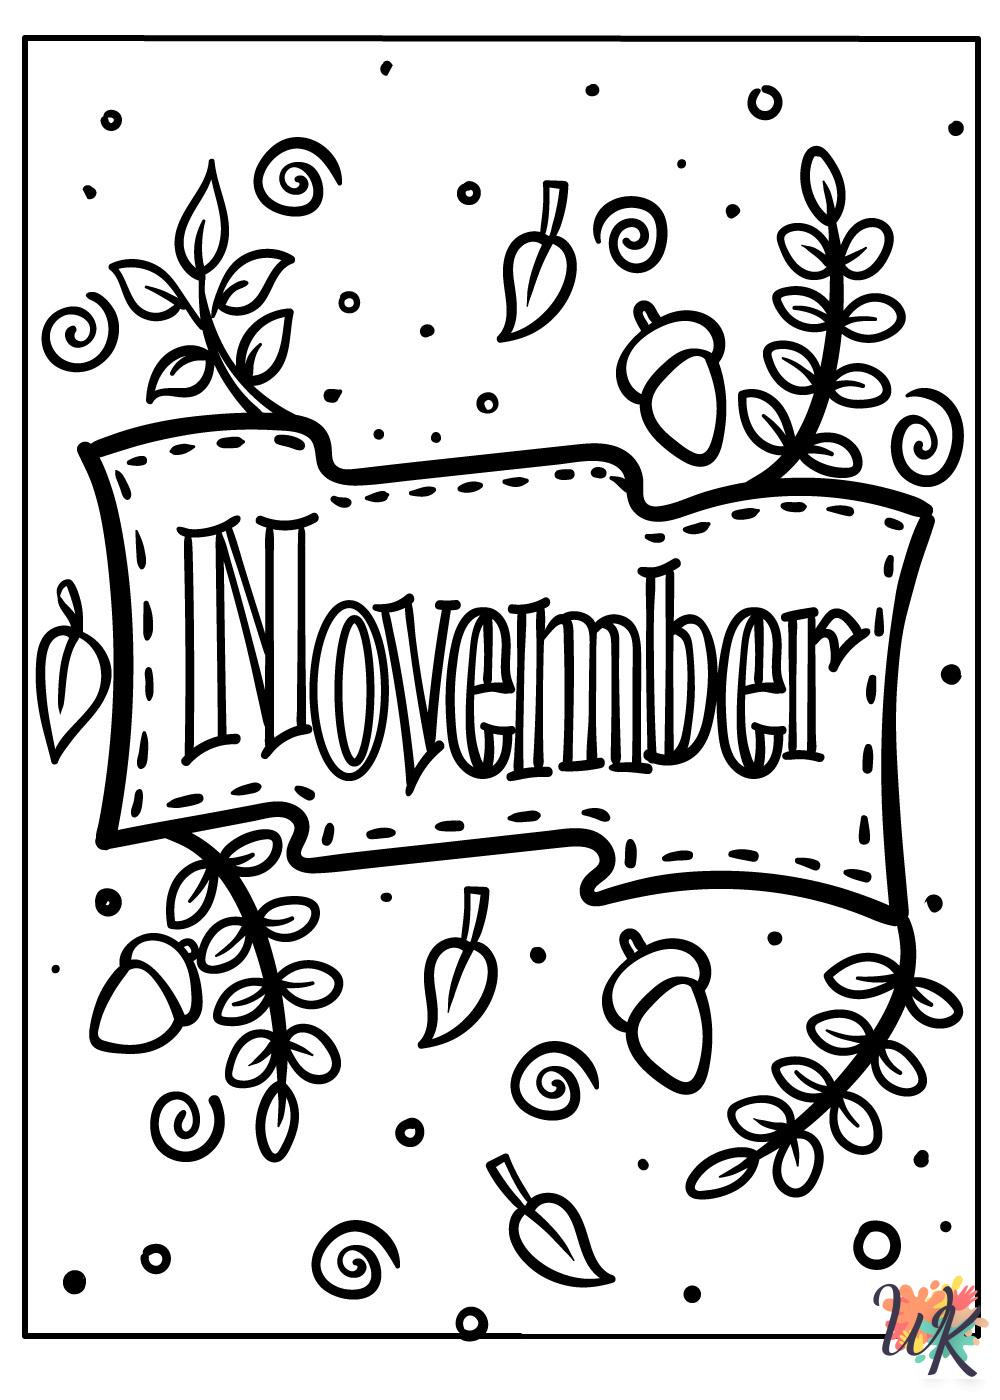 November ornament coloring pages